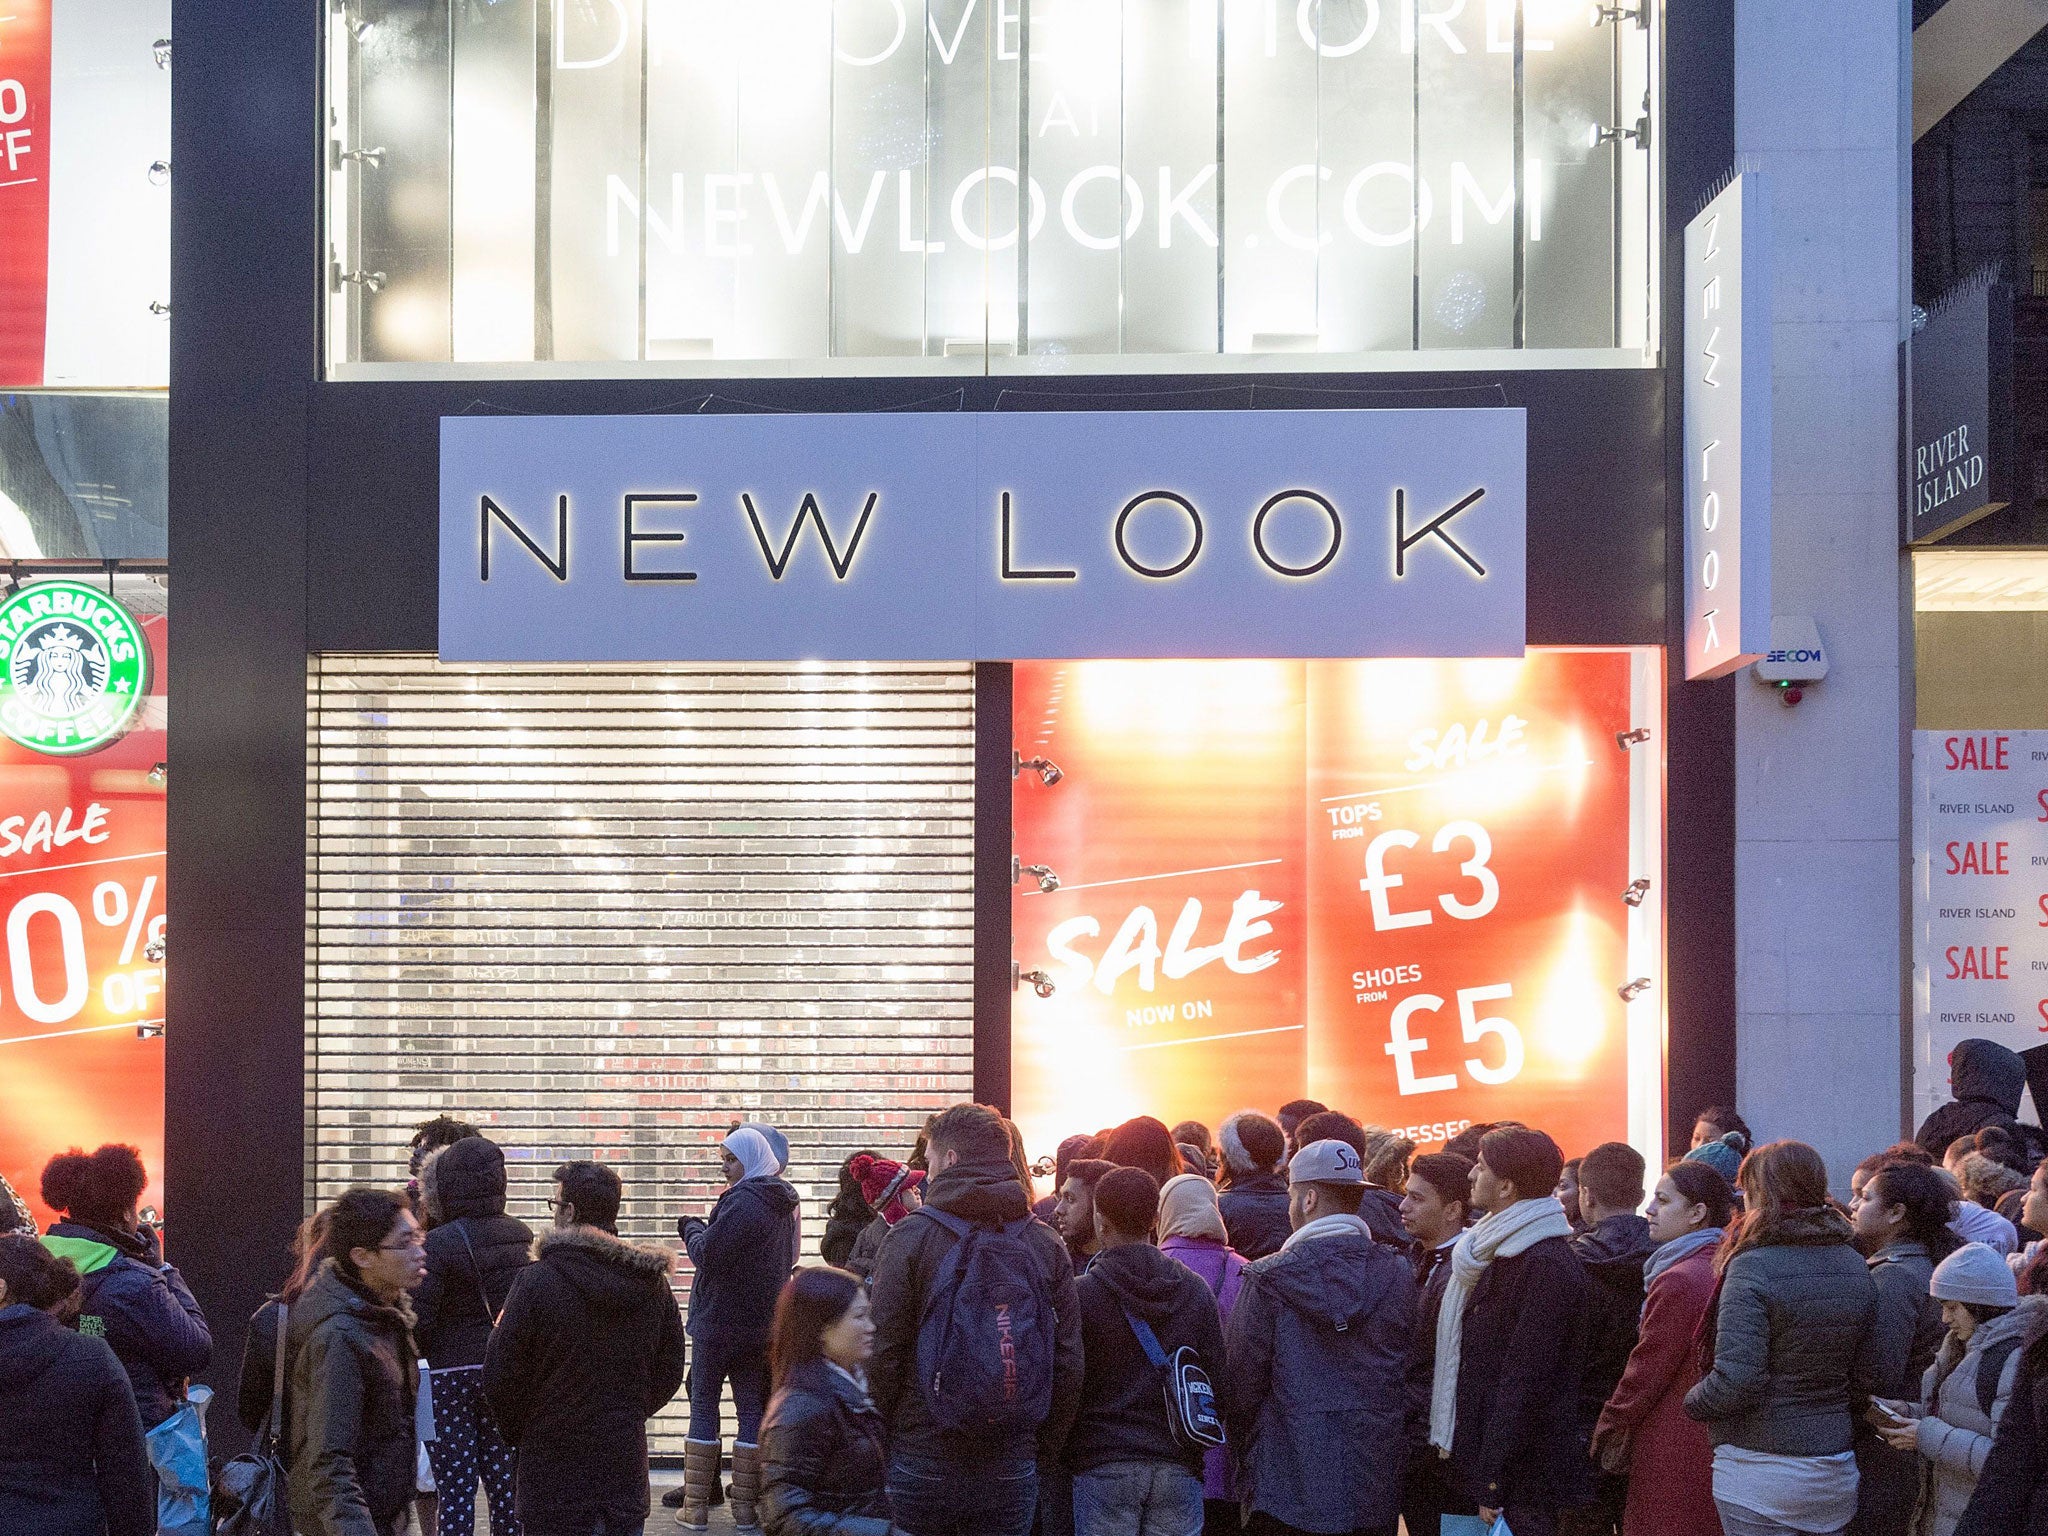 Customers queuing outside a New Look store in Oxford Street on Boxing Day, 2013